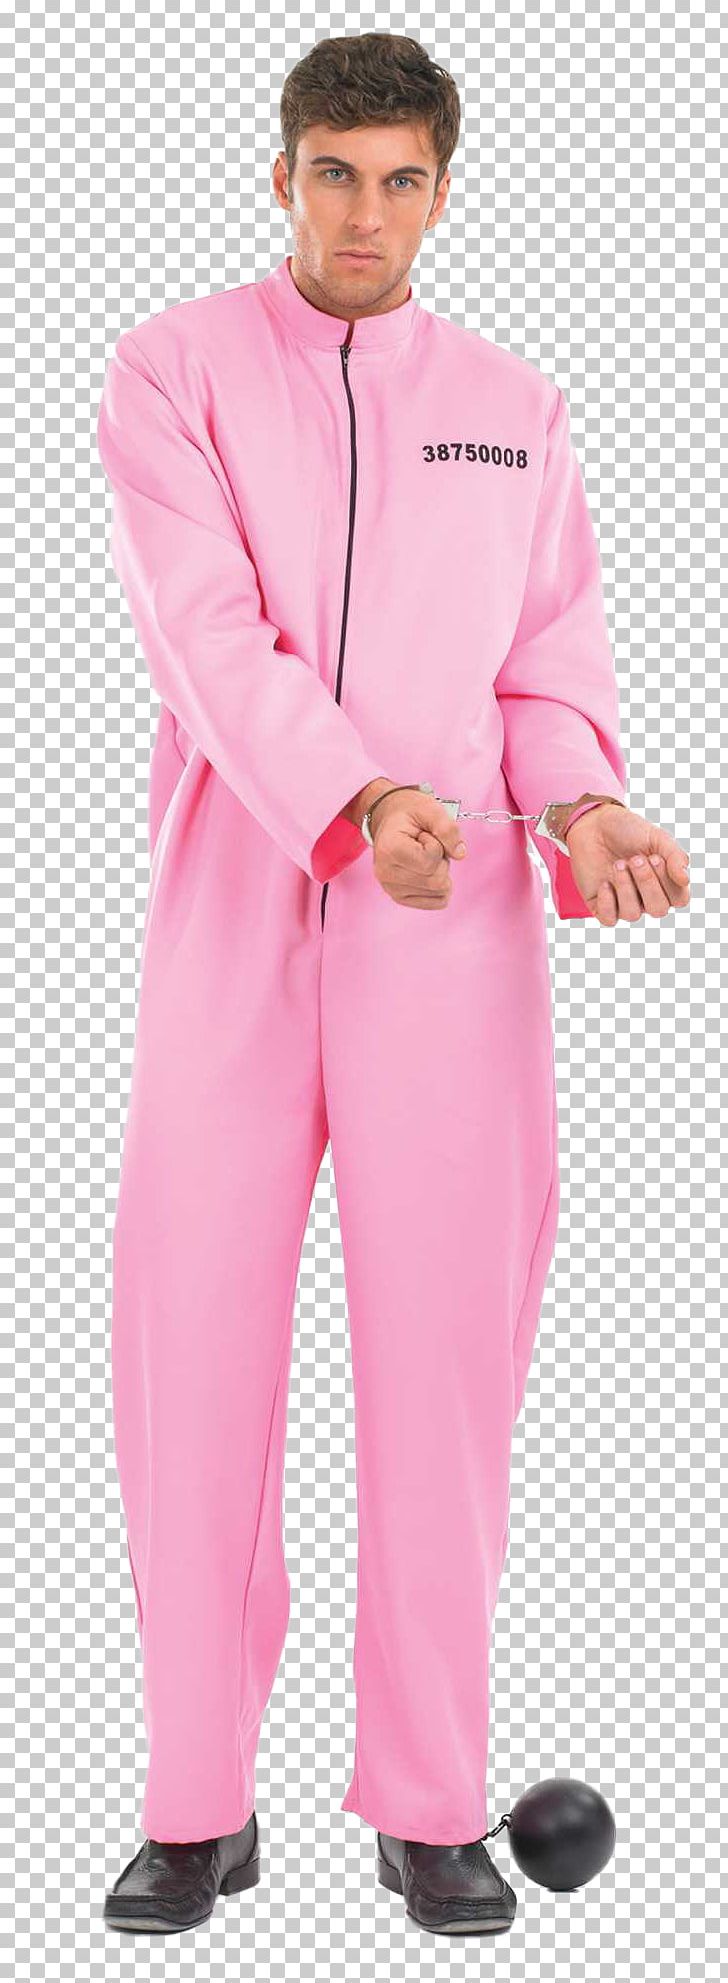 Costume Party Prison Uniform Suit Pink PNG, Clipart, Clothing, Clothing Accessories, Convict, Costume, Costume Party Free PNG Download